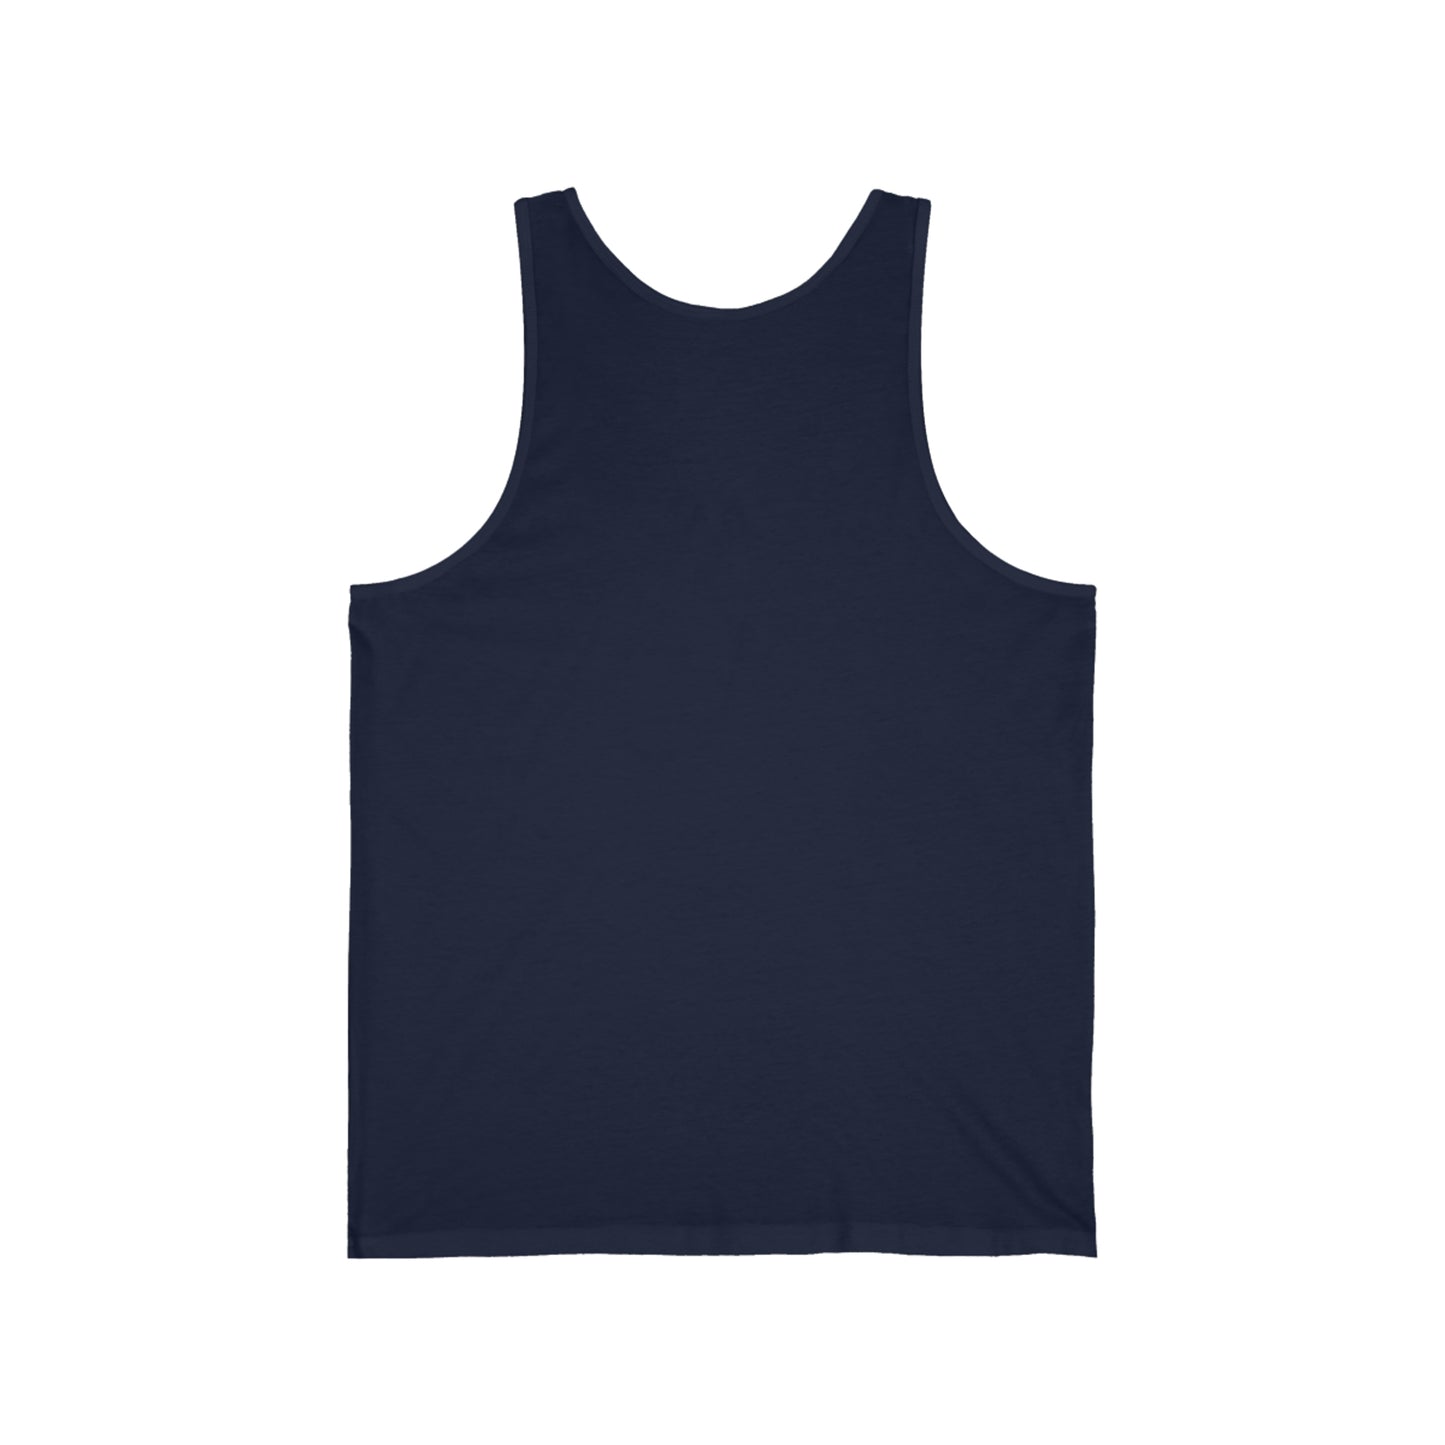 Japanese Roots Design 5: Tank Top